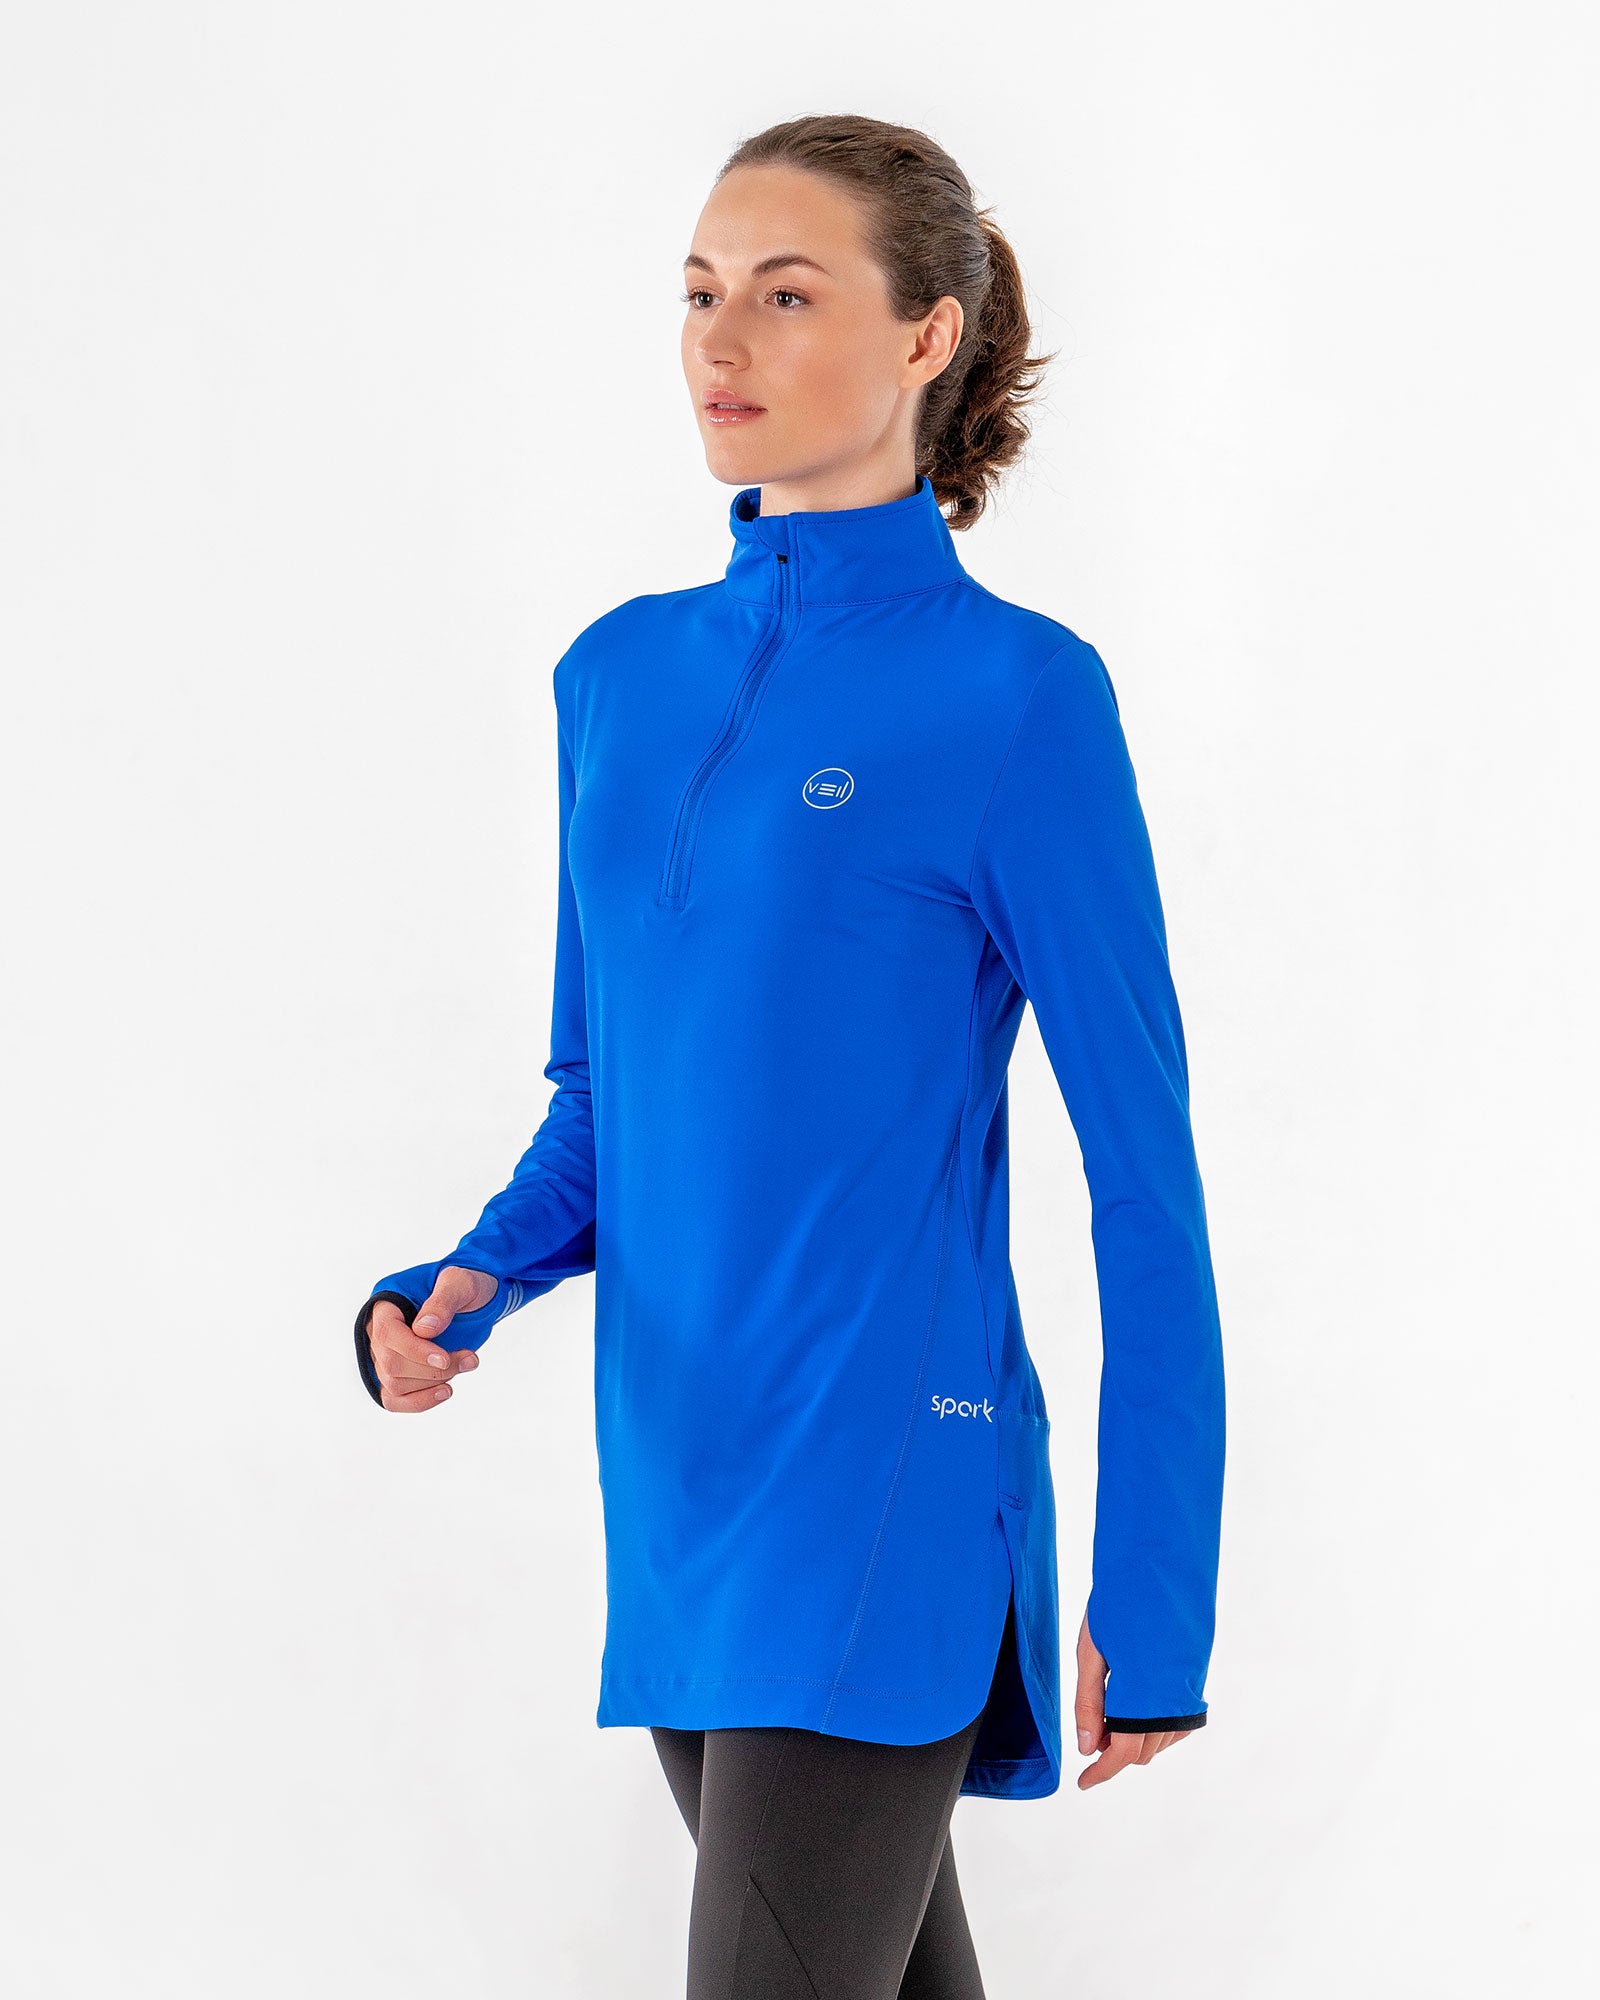 Spark Half-Zip in royal blue by Veil Garments. Modest activewear collection.